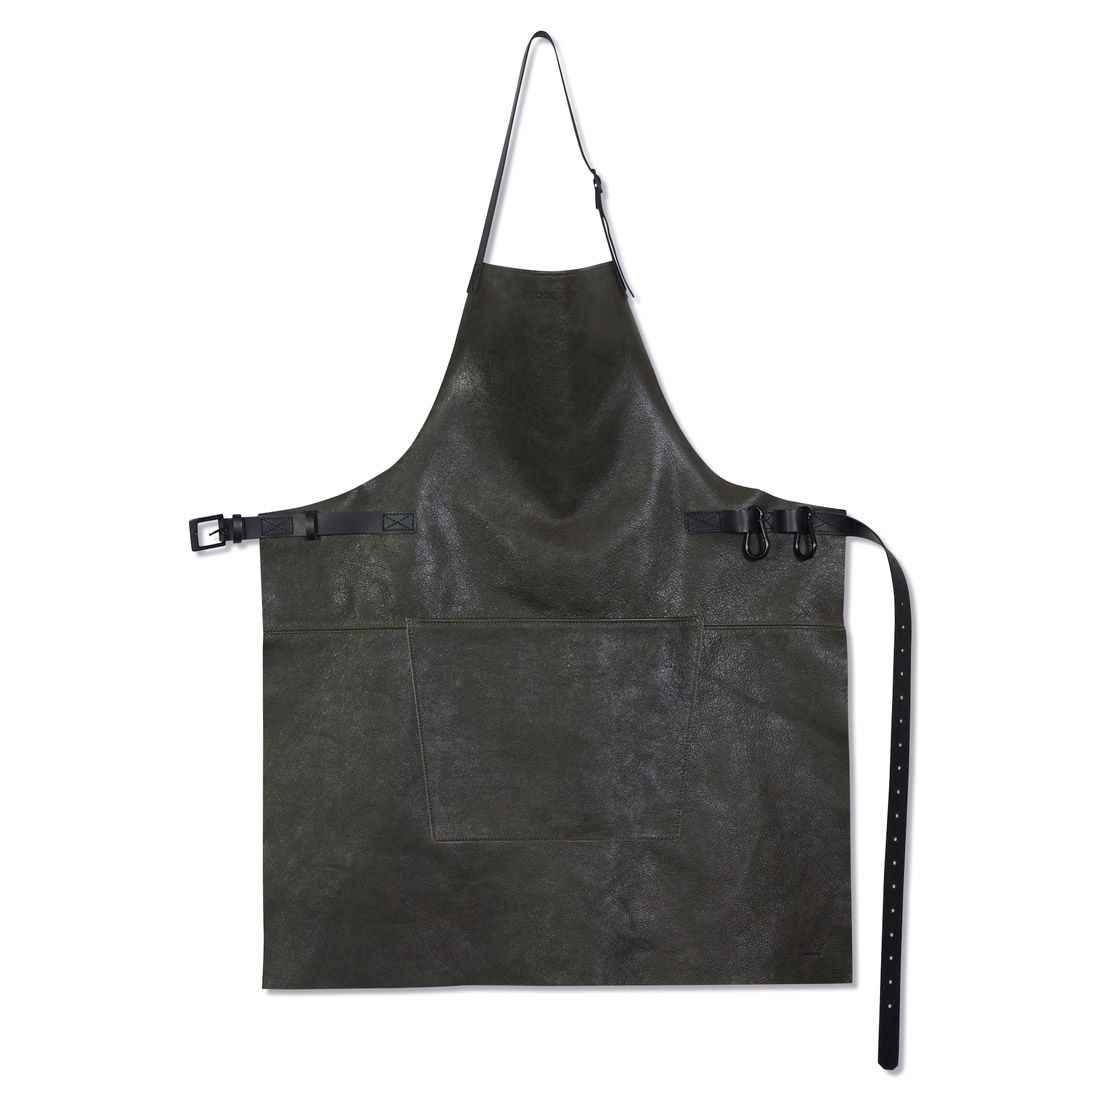 old leather apron  front apron made of leather  occupational safety  work apron